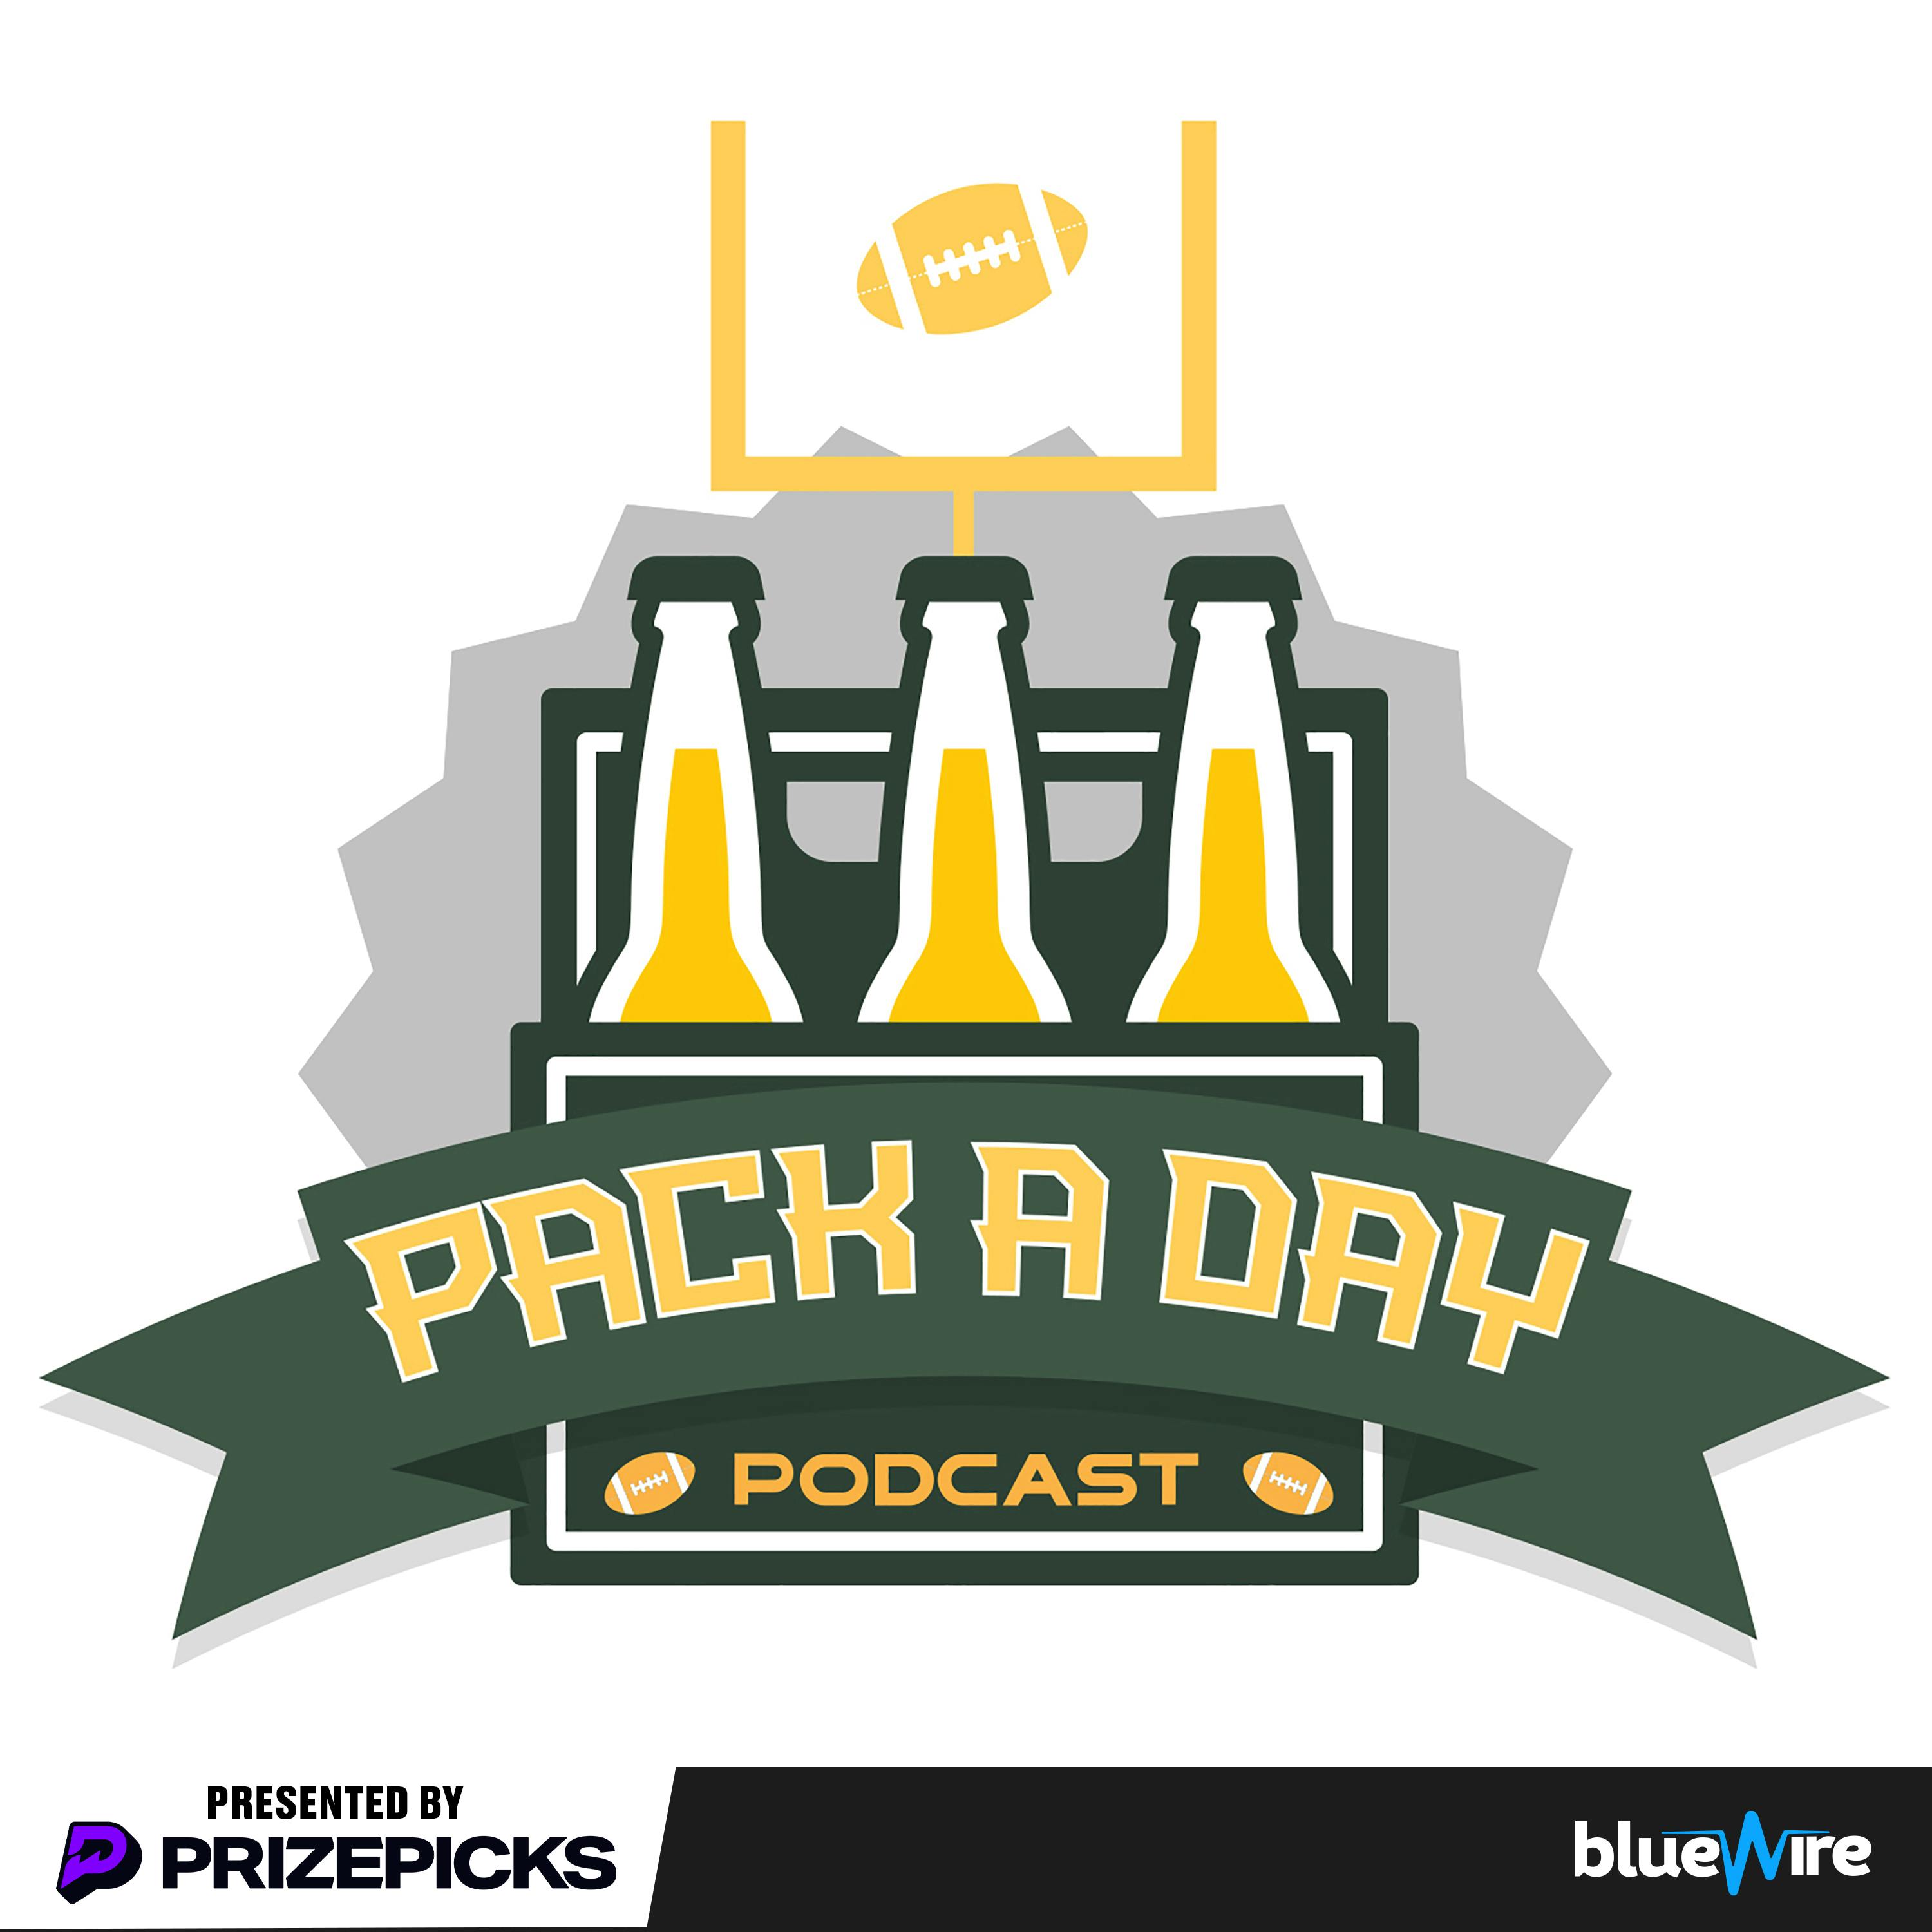 Daily Draft - Packers Day 3 Review